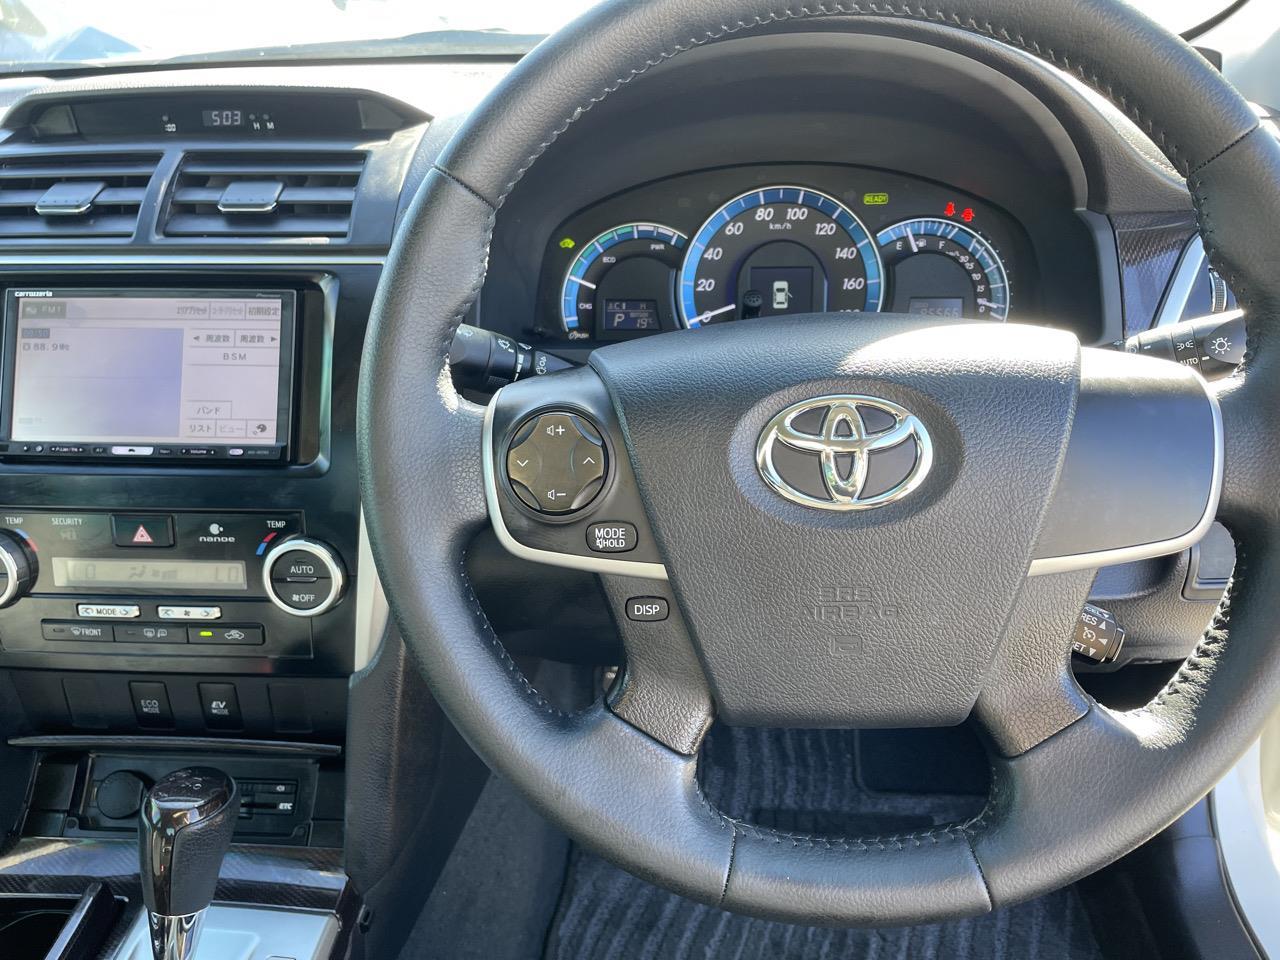 image-6, 2012 Toyota Camry Hybrid at Christchurch